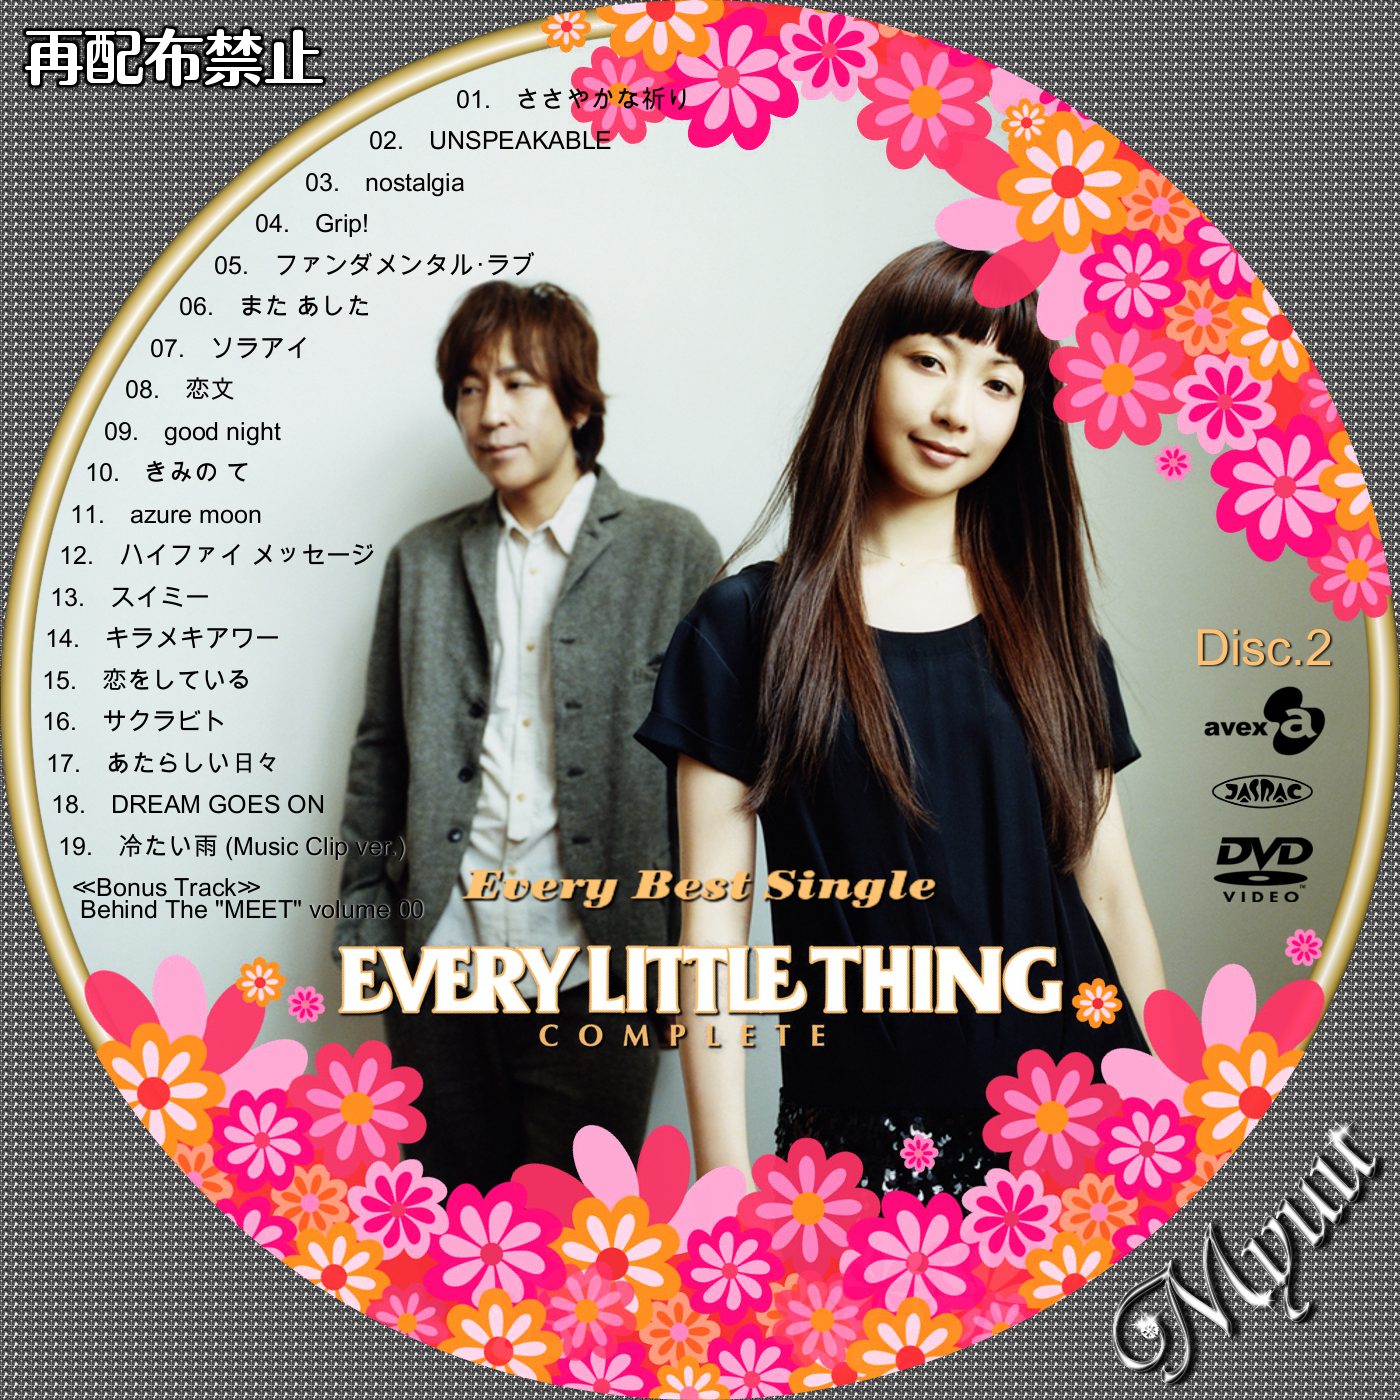 Every Little Thing Every Best Single COMPLETE